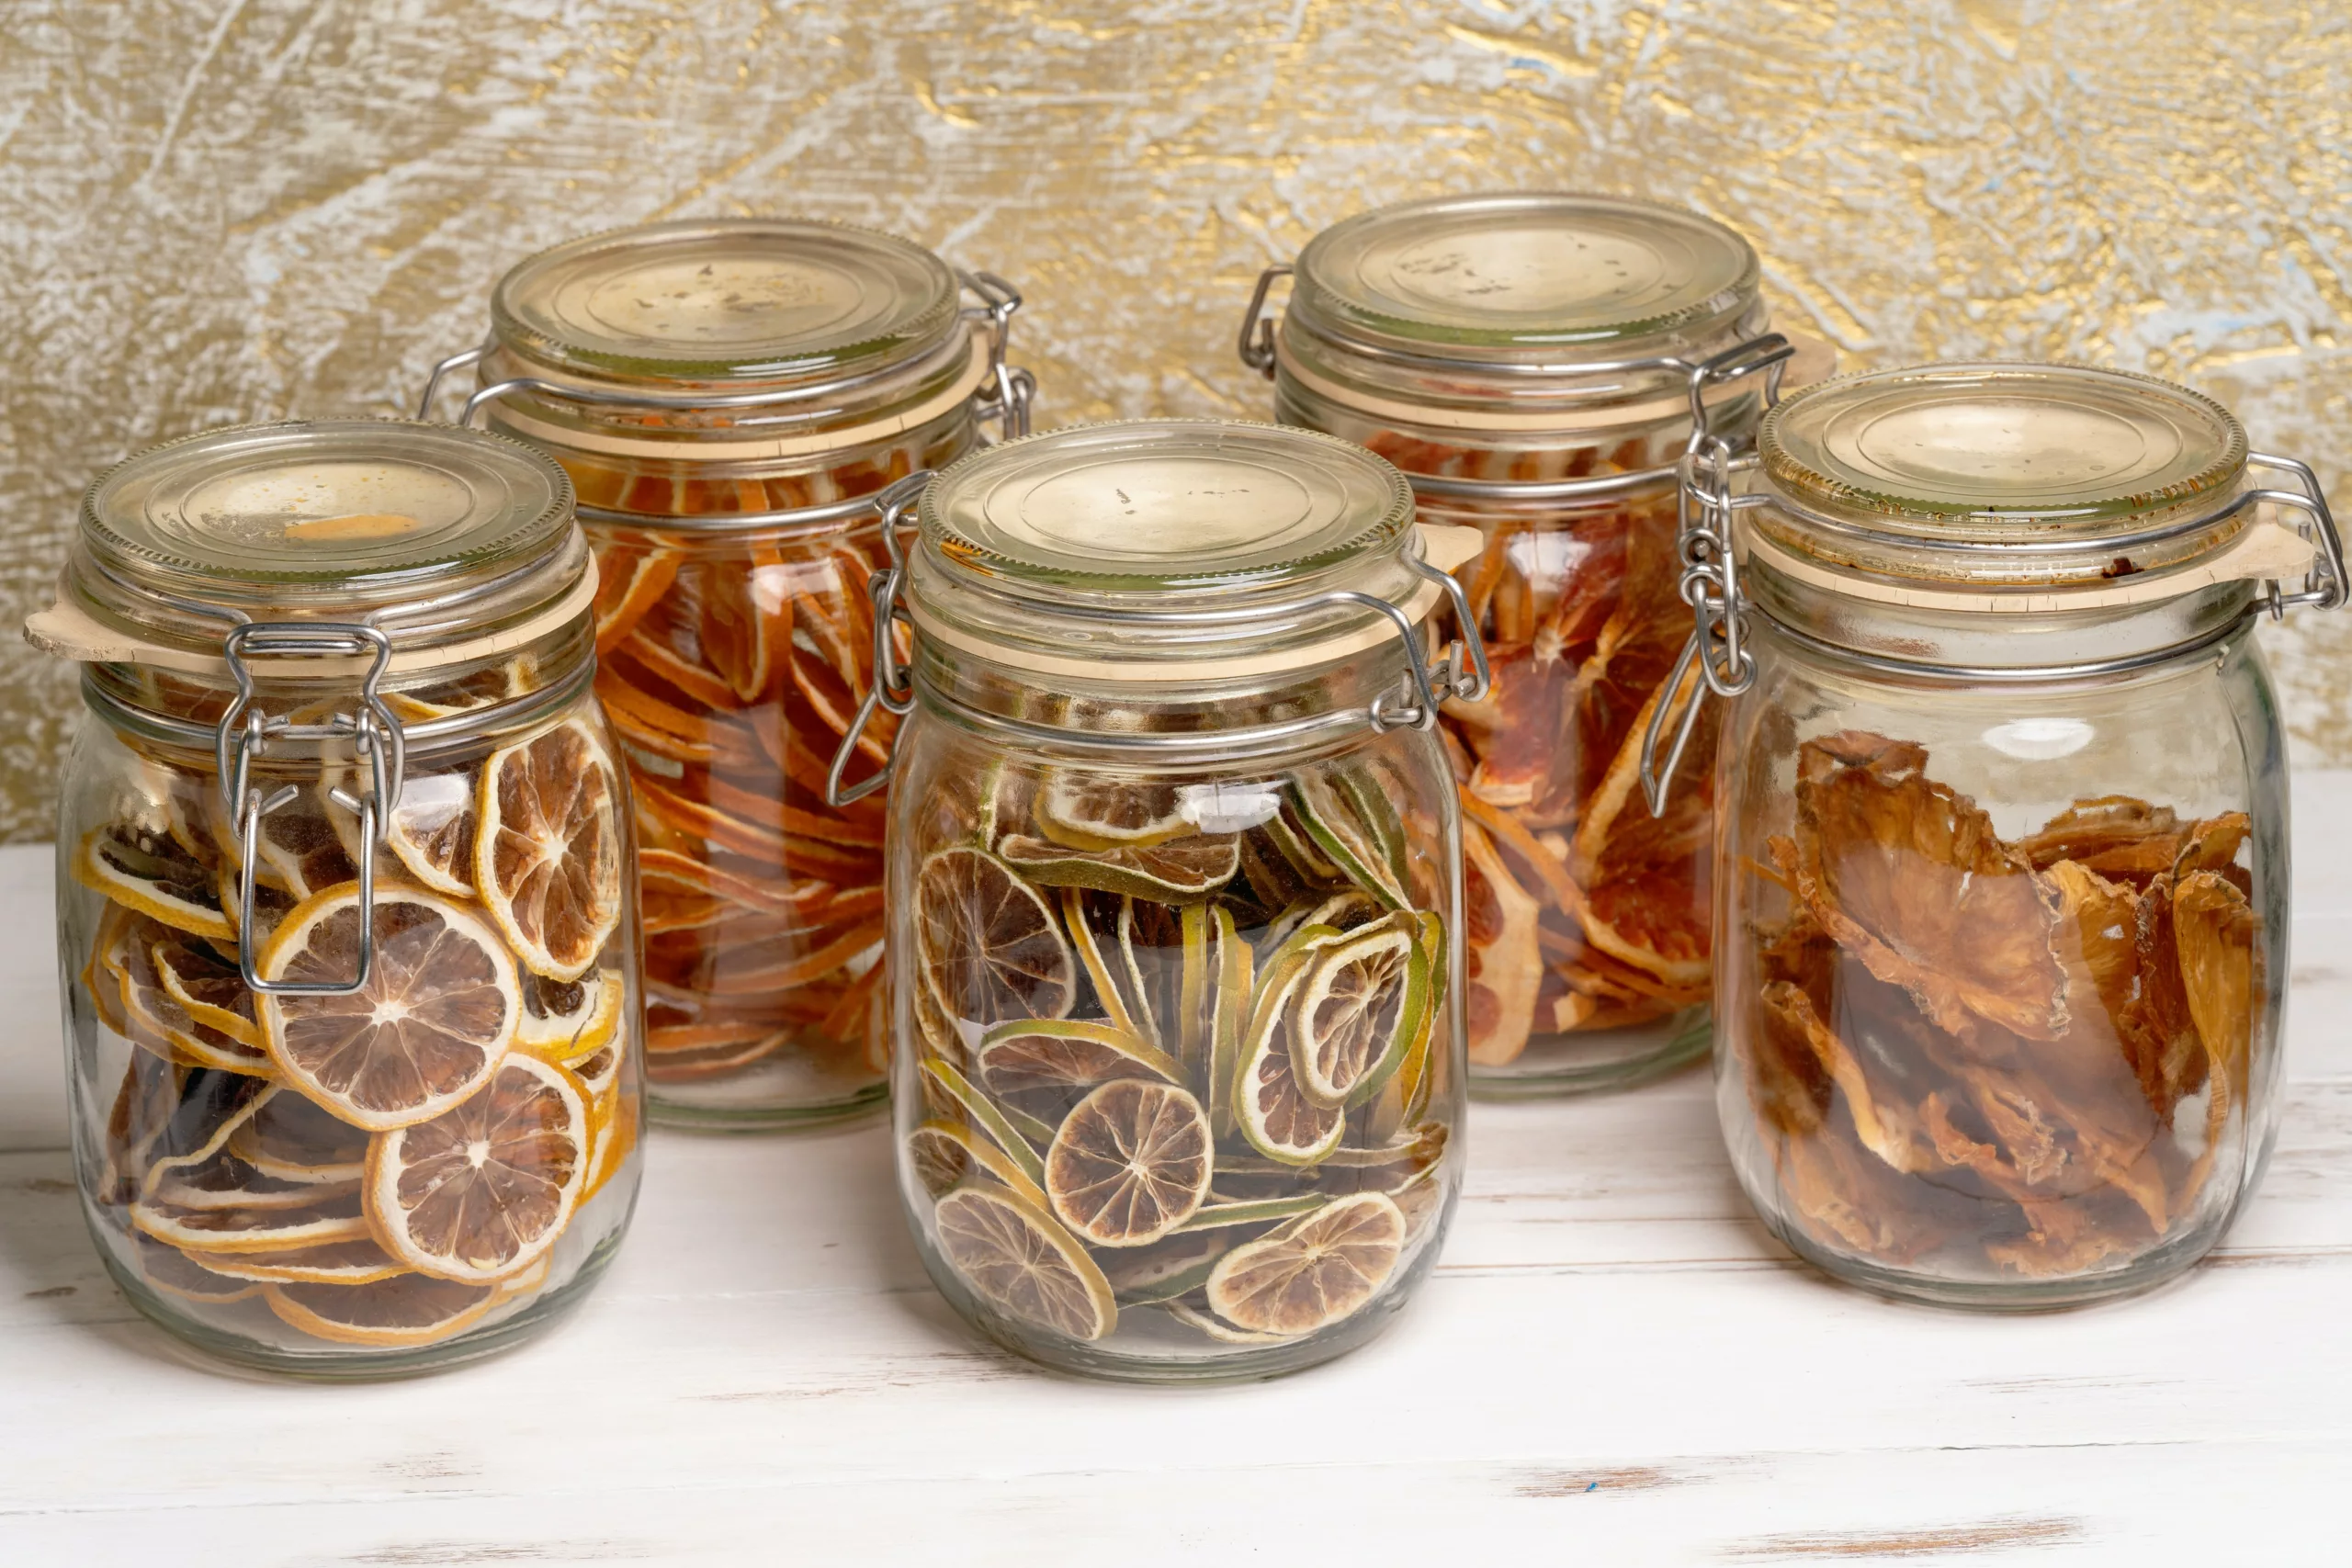 Best fruits for storing in mason jars